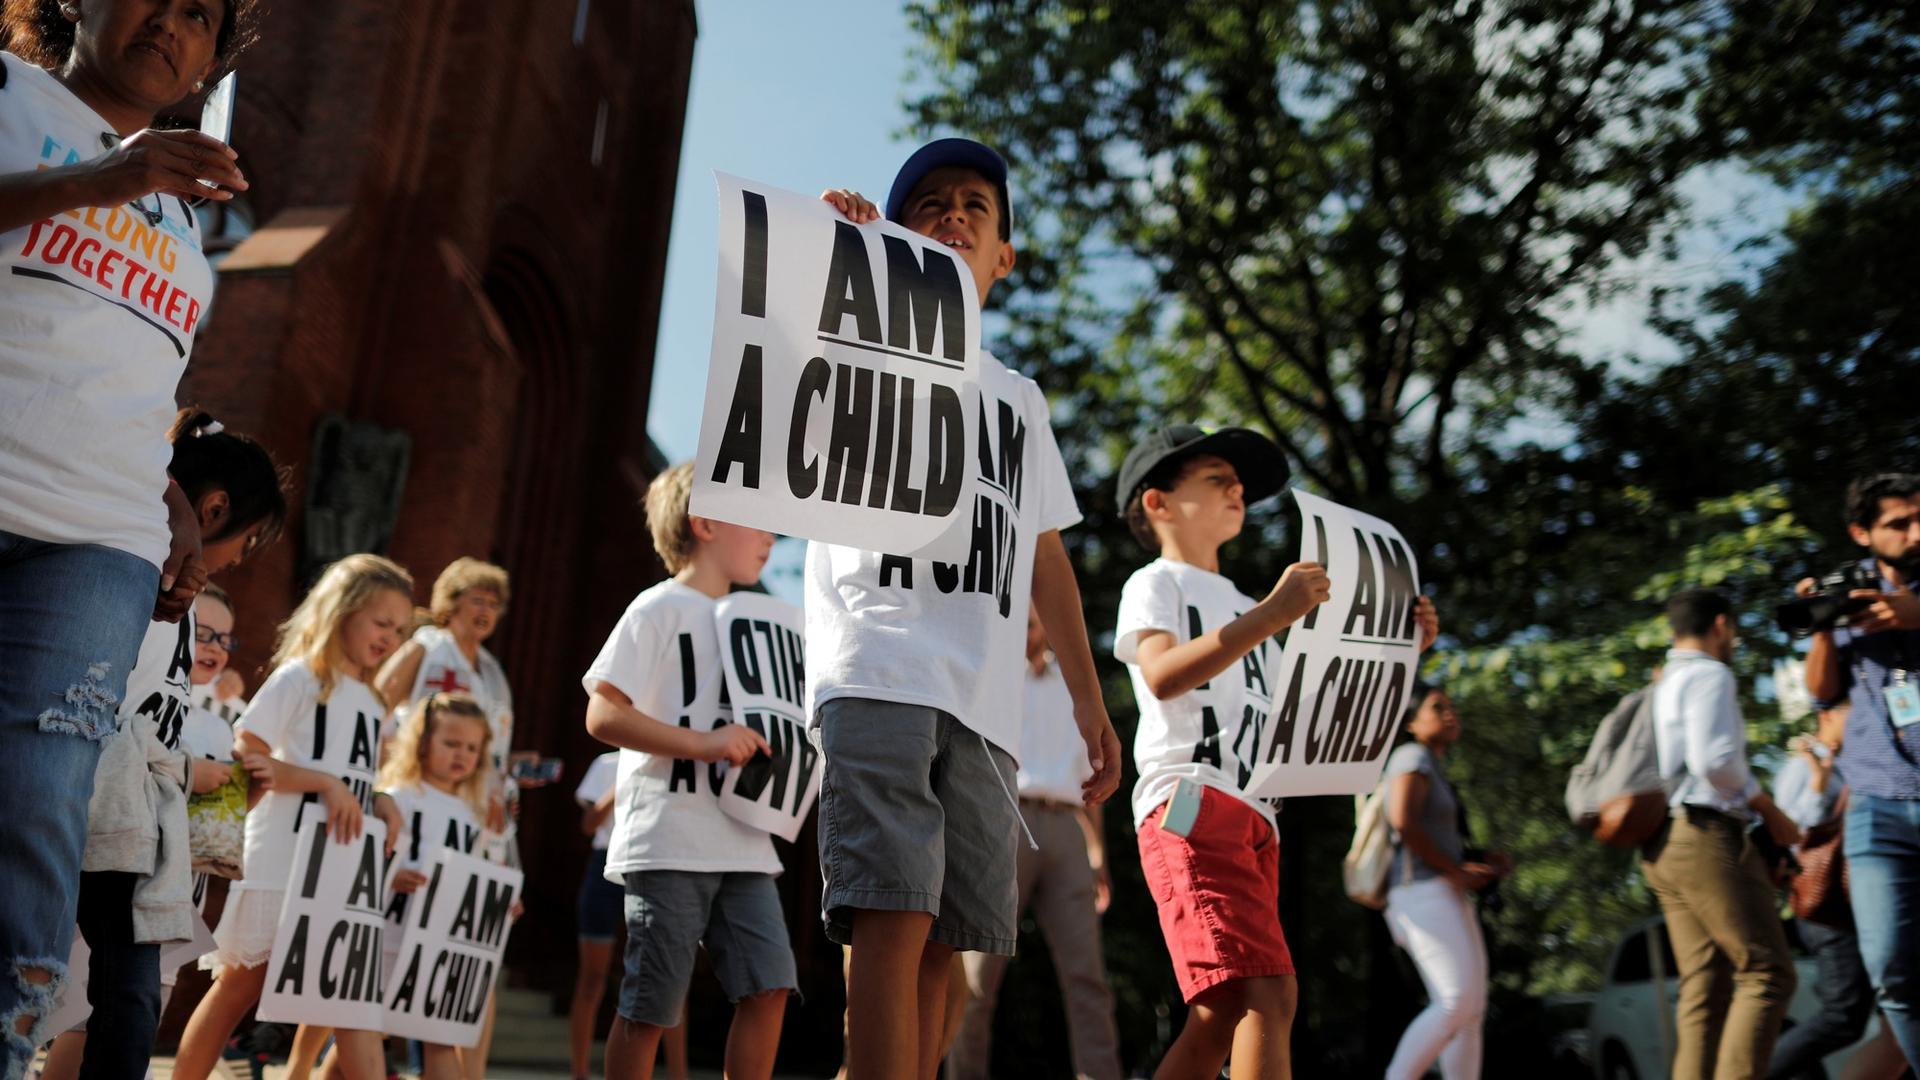 Children carry signs during a protest march in Washington DC, that read 'I am a child.'